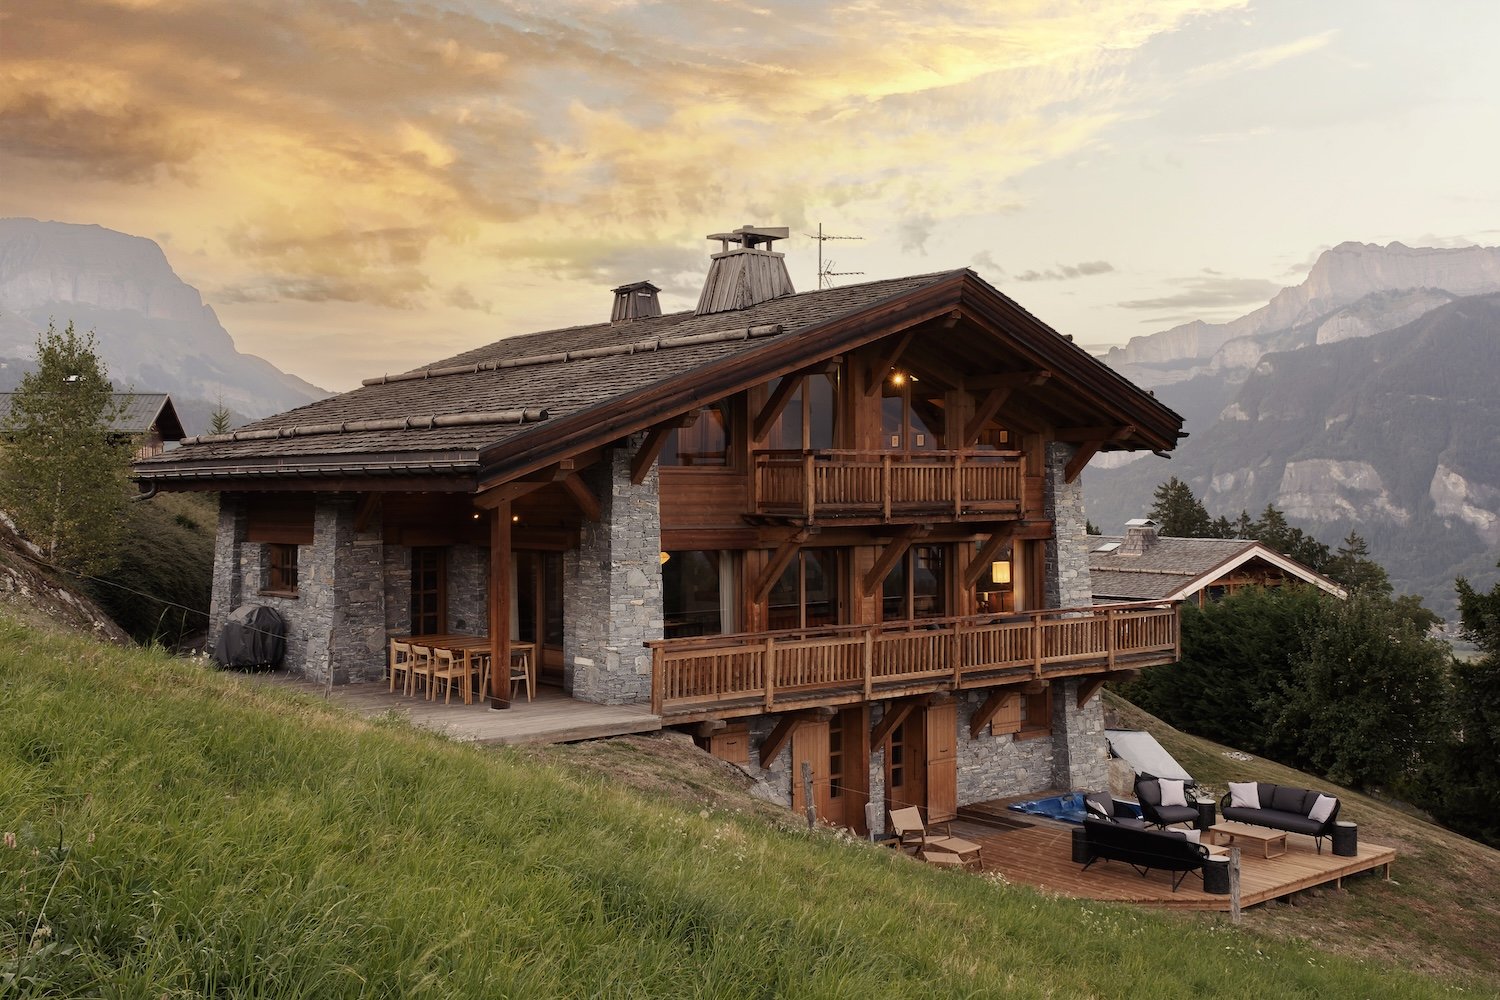 Francis+York+Discover This Luxury Chalet in the French Alps From The August Premium Collection 00010.jpg